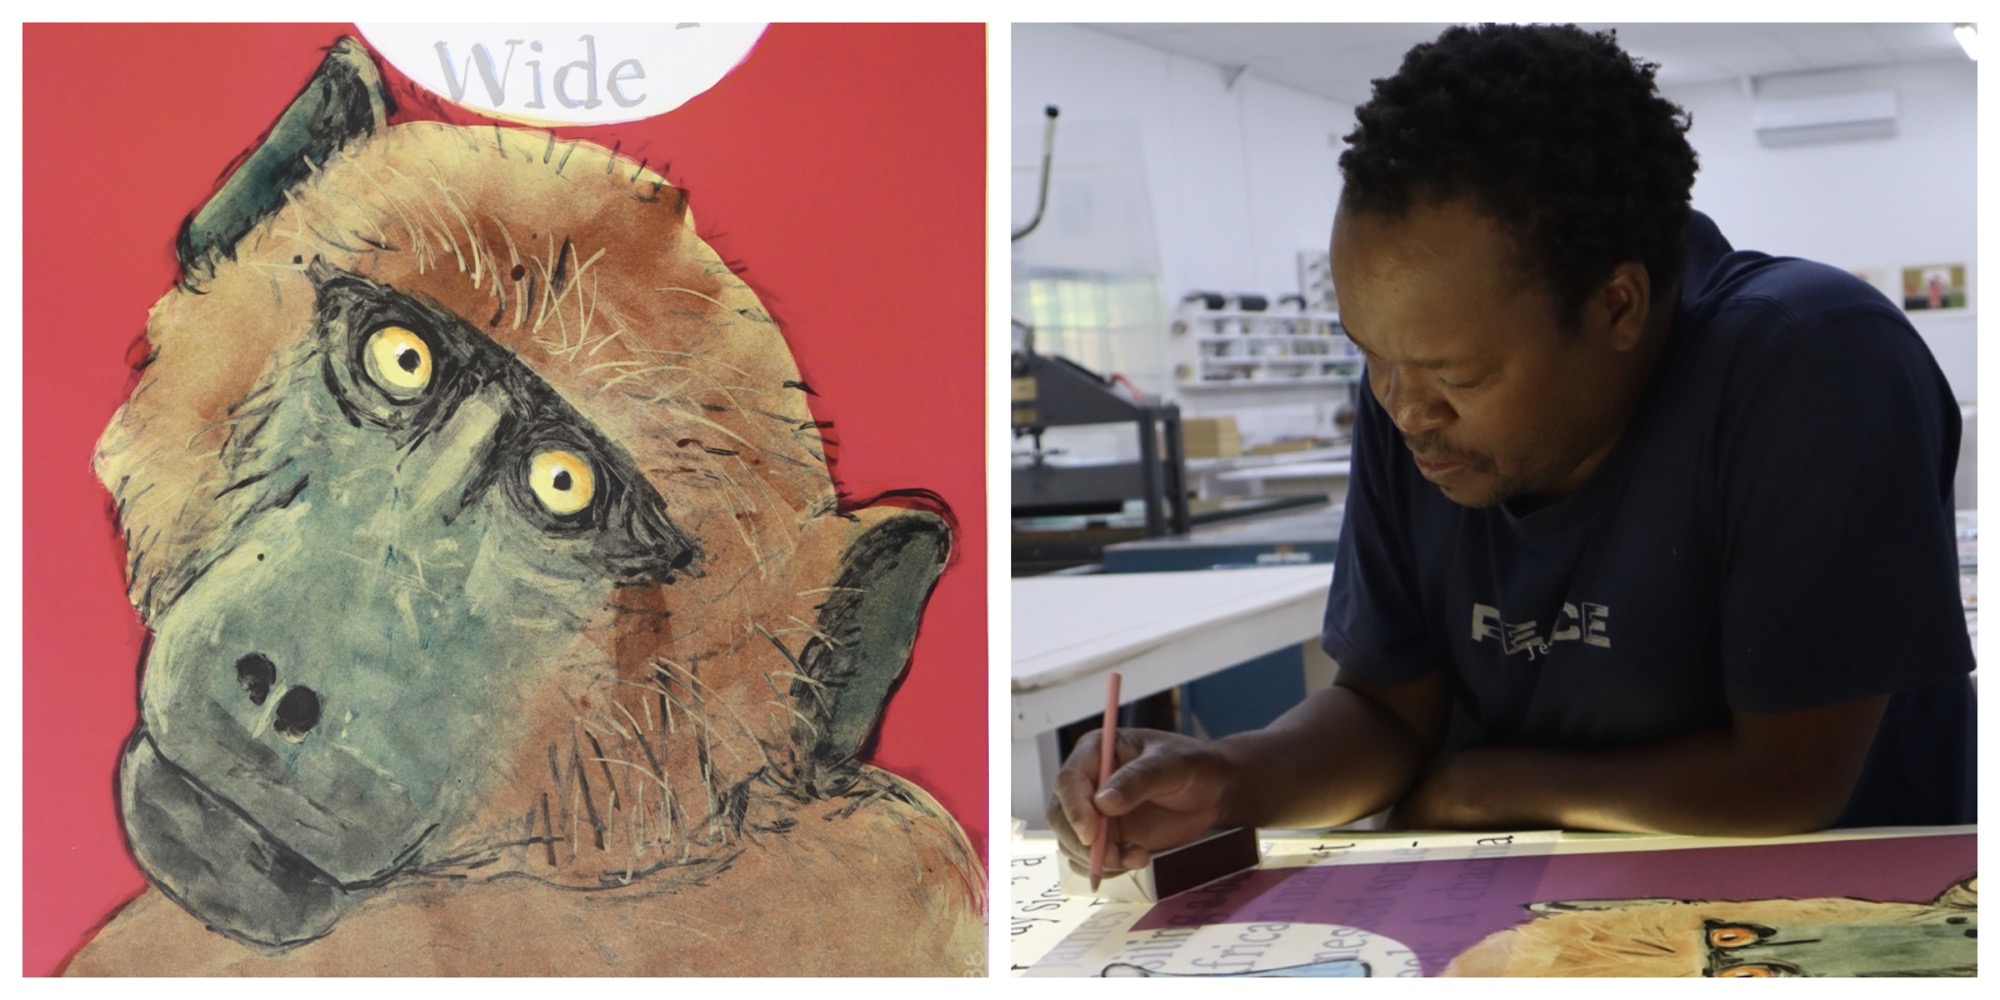 Colbert mashile working and one of his baboon prints as a link to his page on this website